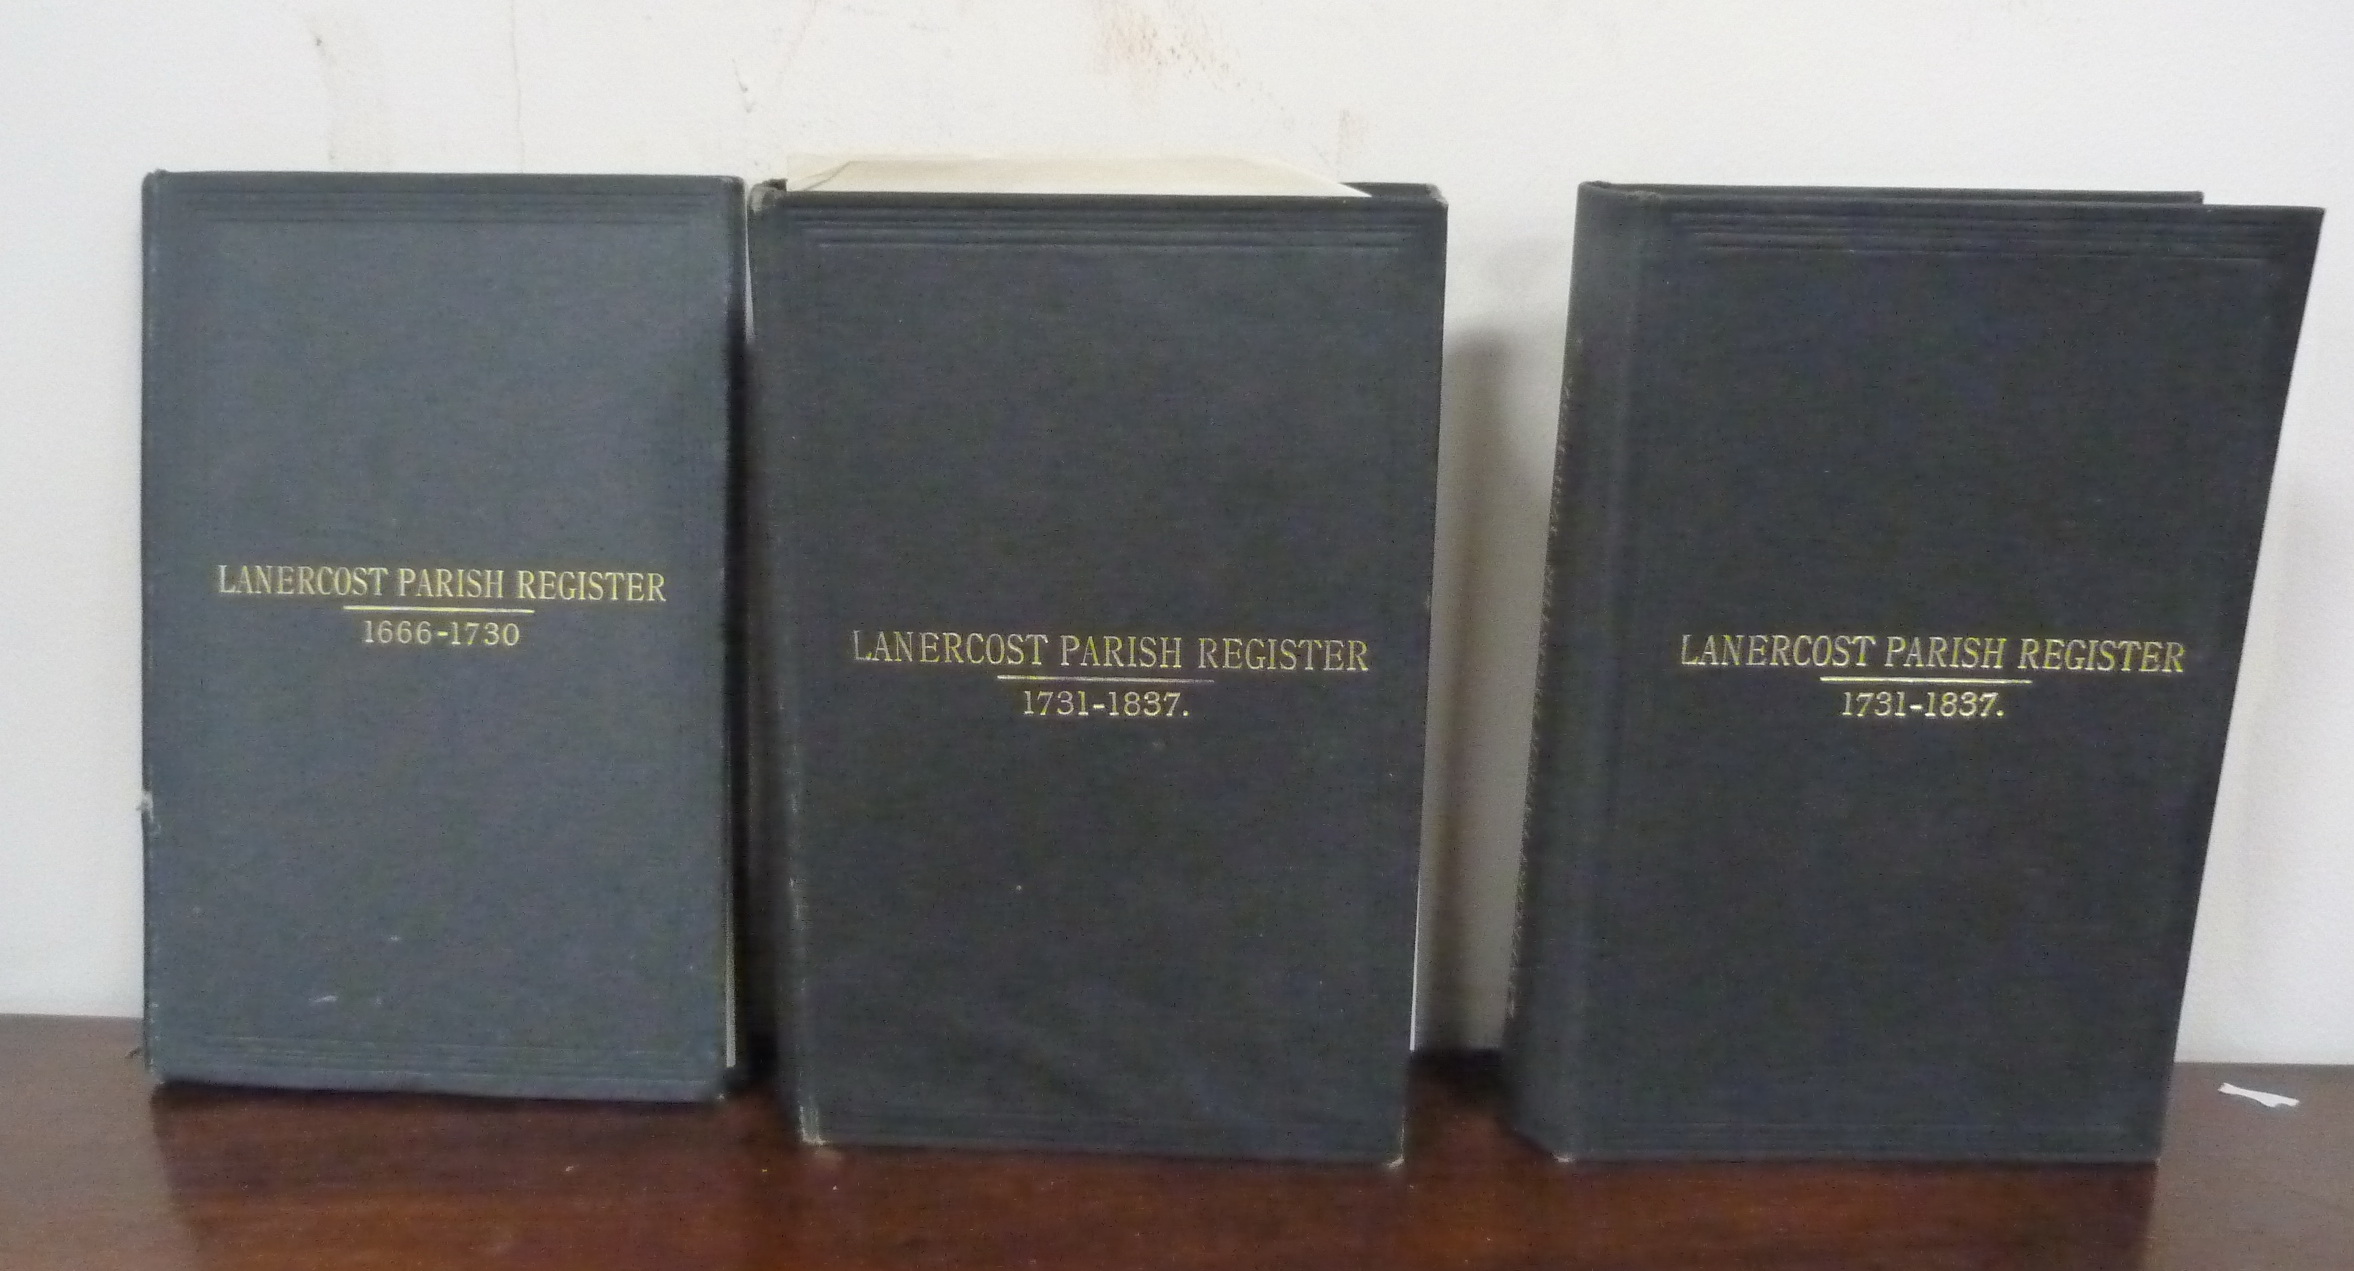 WILLIS T. W. (Ed).  The Register of the Parish of Lanercost. 2 vols. plus duplicate of the 2nd